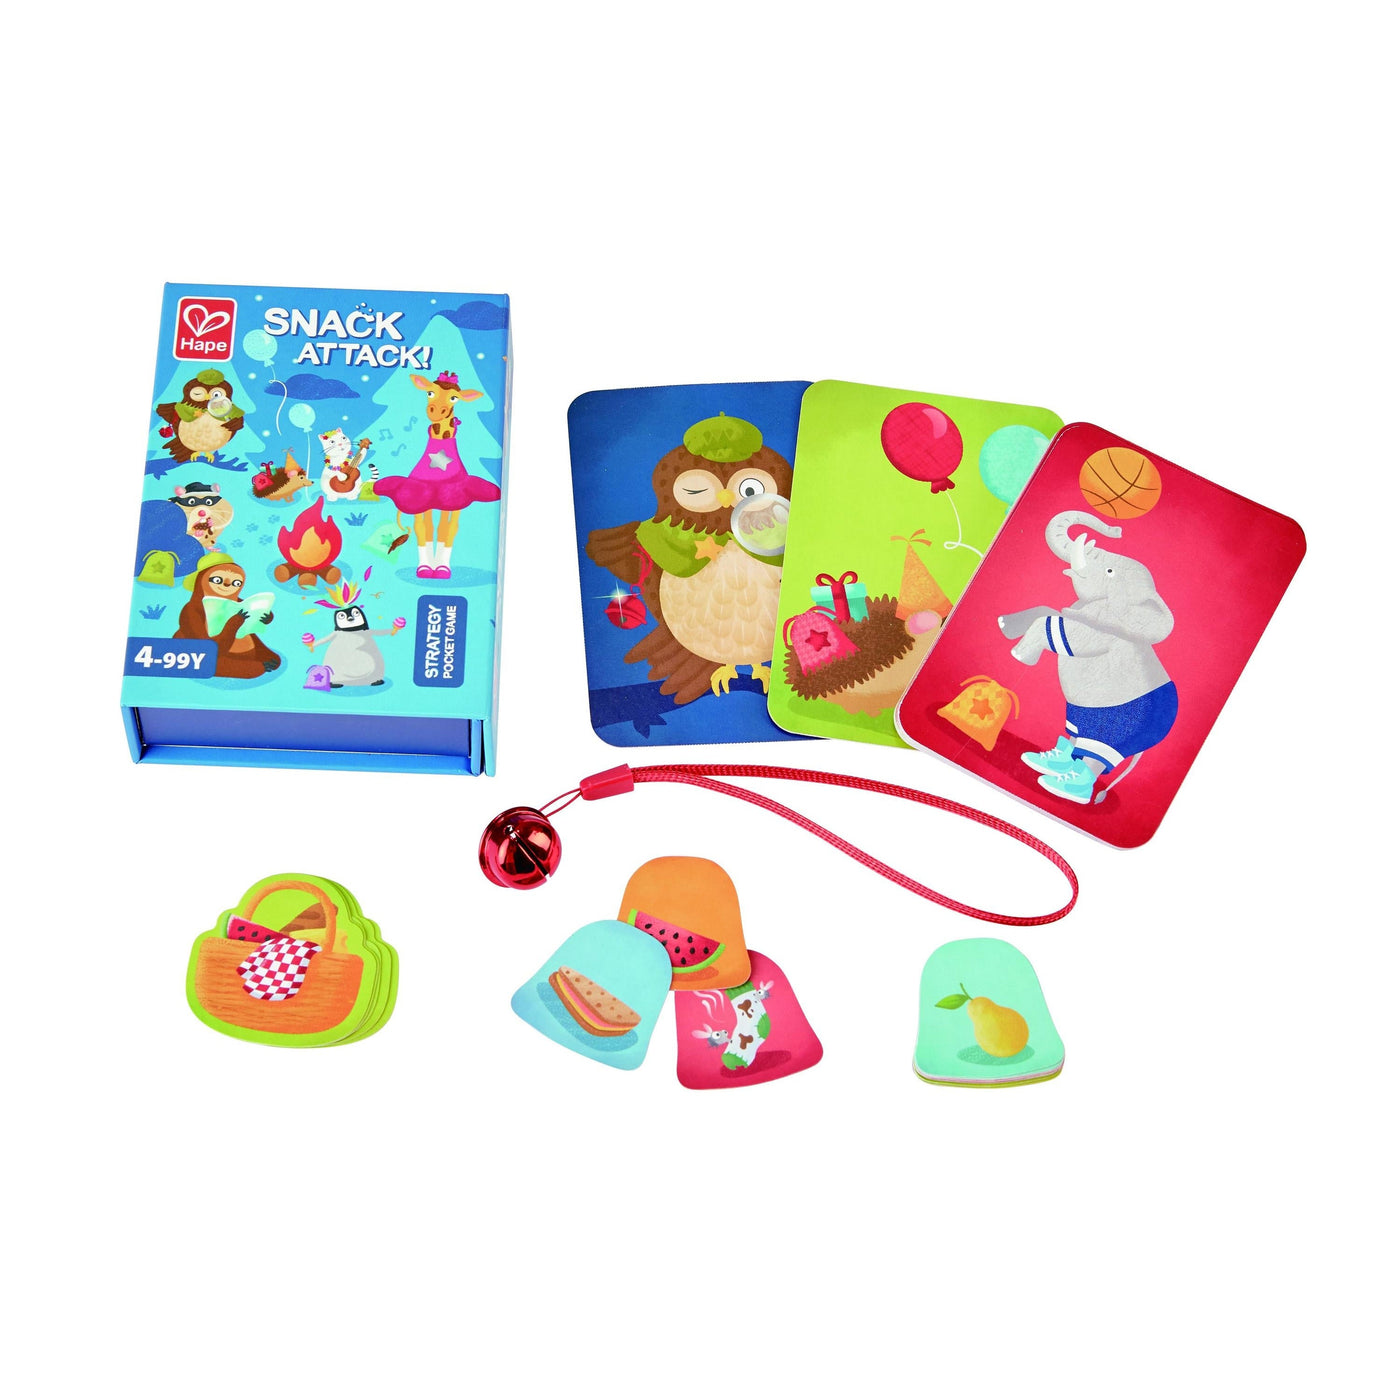 Hape Snack Attack Strategy Card Game